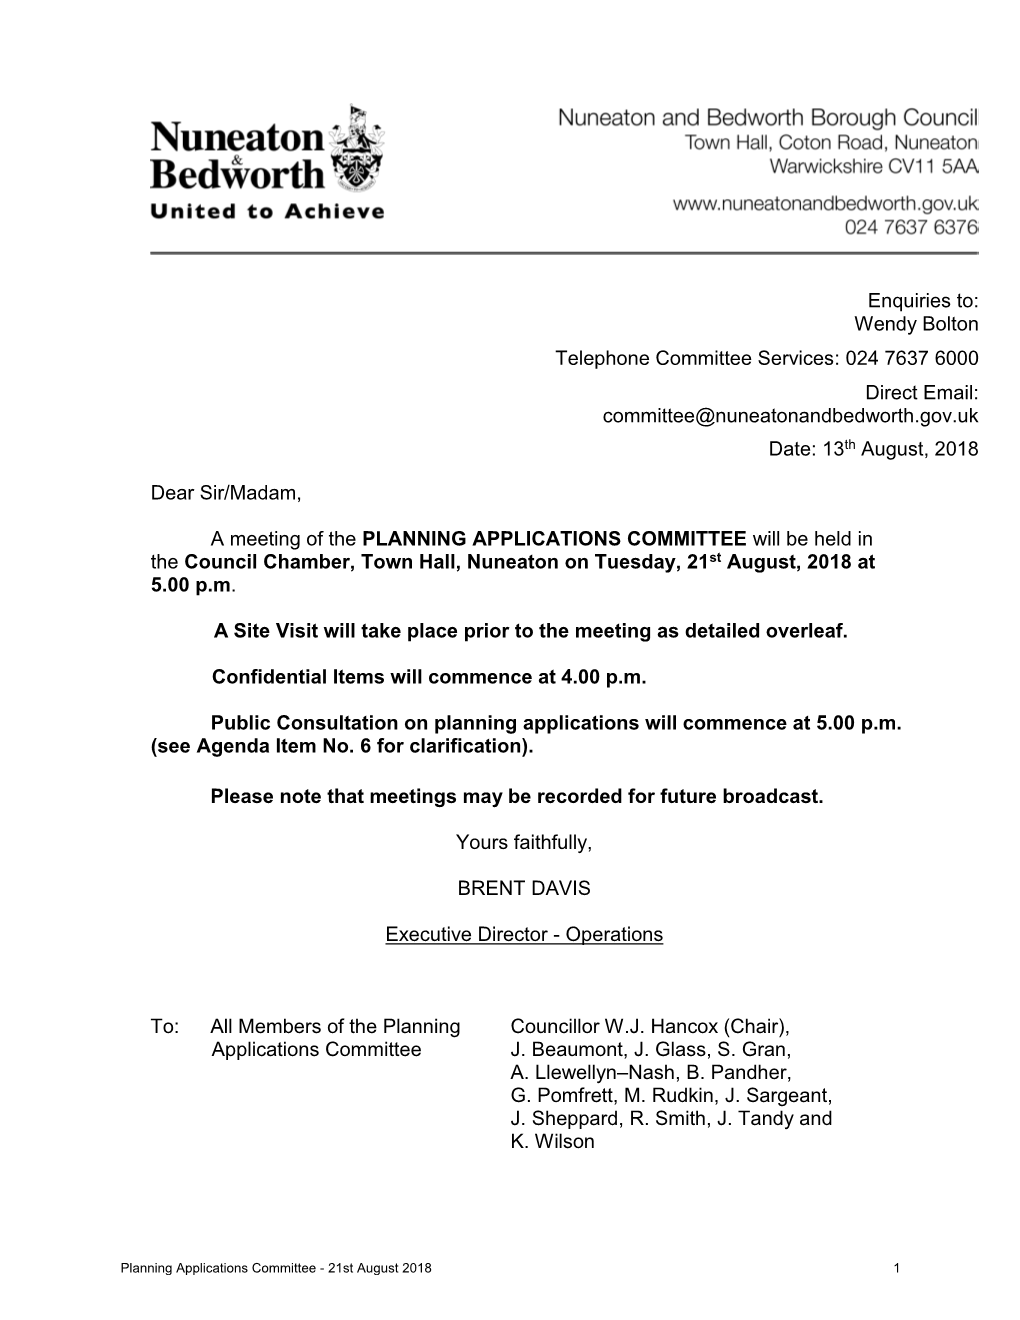 Dear Sir/Madam, a Meeting of the PLANNING APPLICATIONS COMMITTEE Will Be Held in the Council Chamber, Town Hall, Nuneaton On